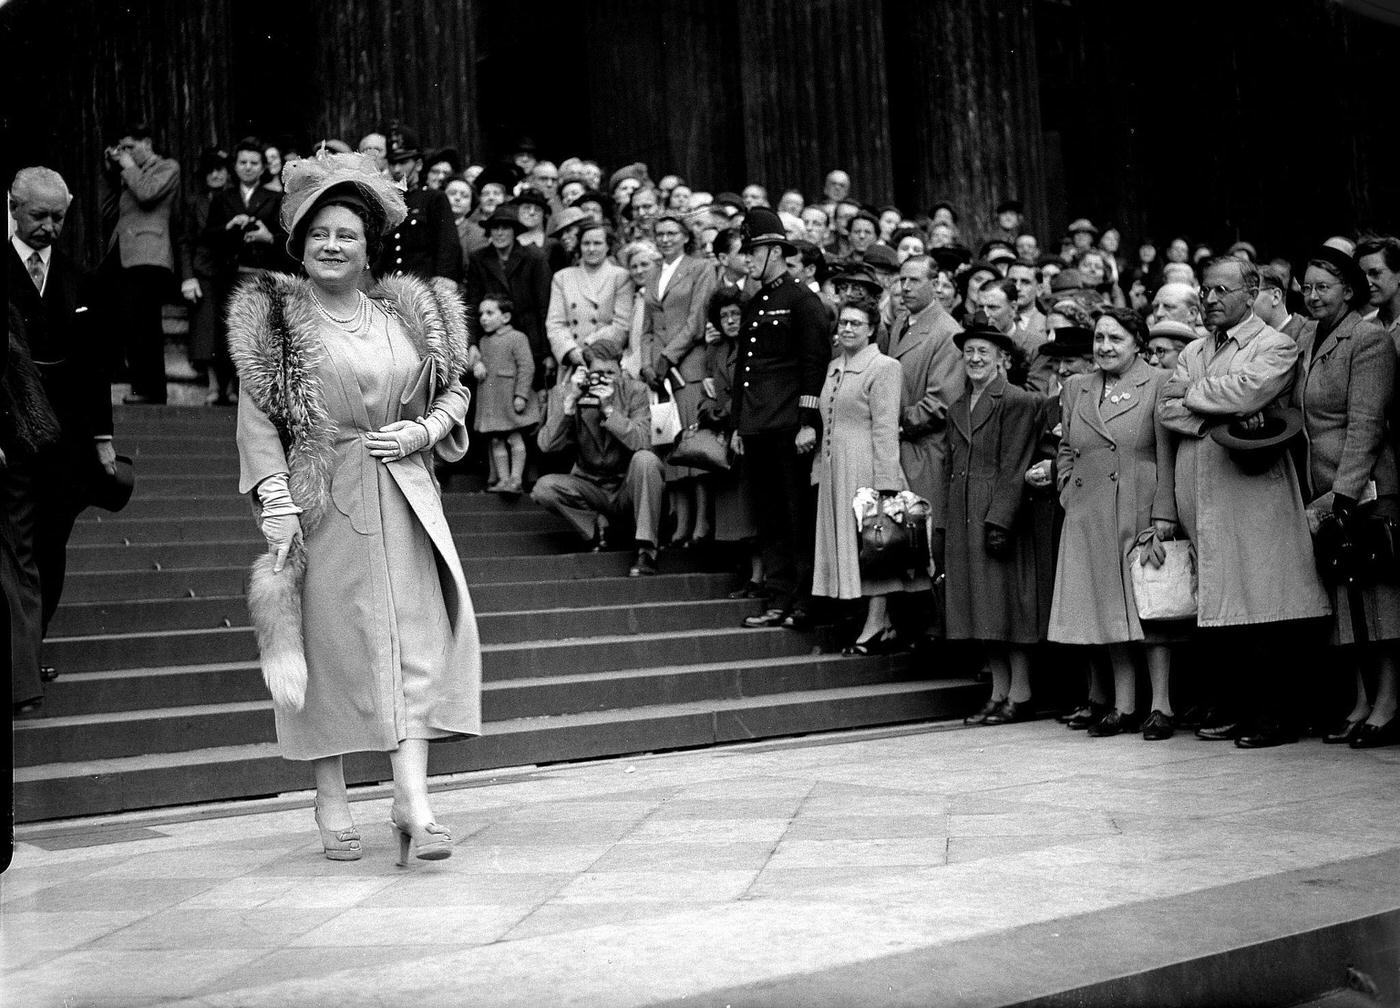 Queen Elizabeth leaving St. Paul's Cathedral after attending a London Mission thanksgiving service, London, 1940.